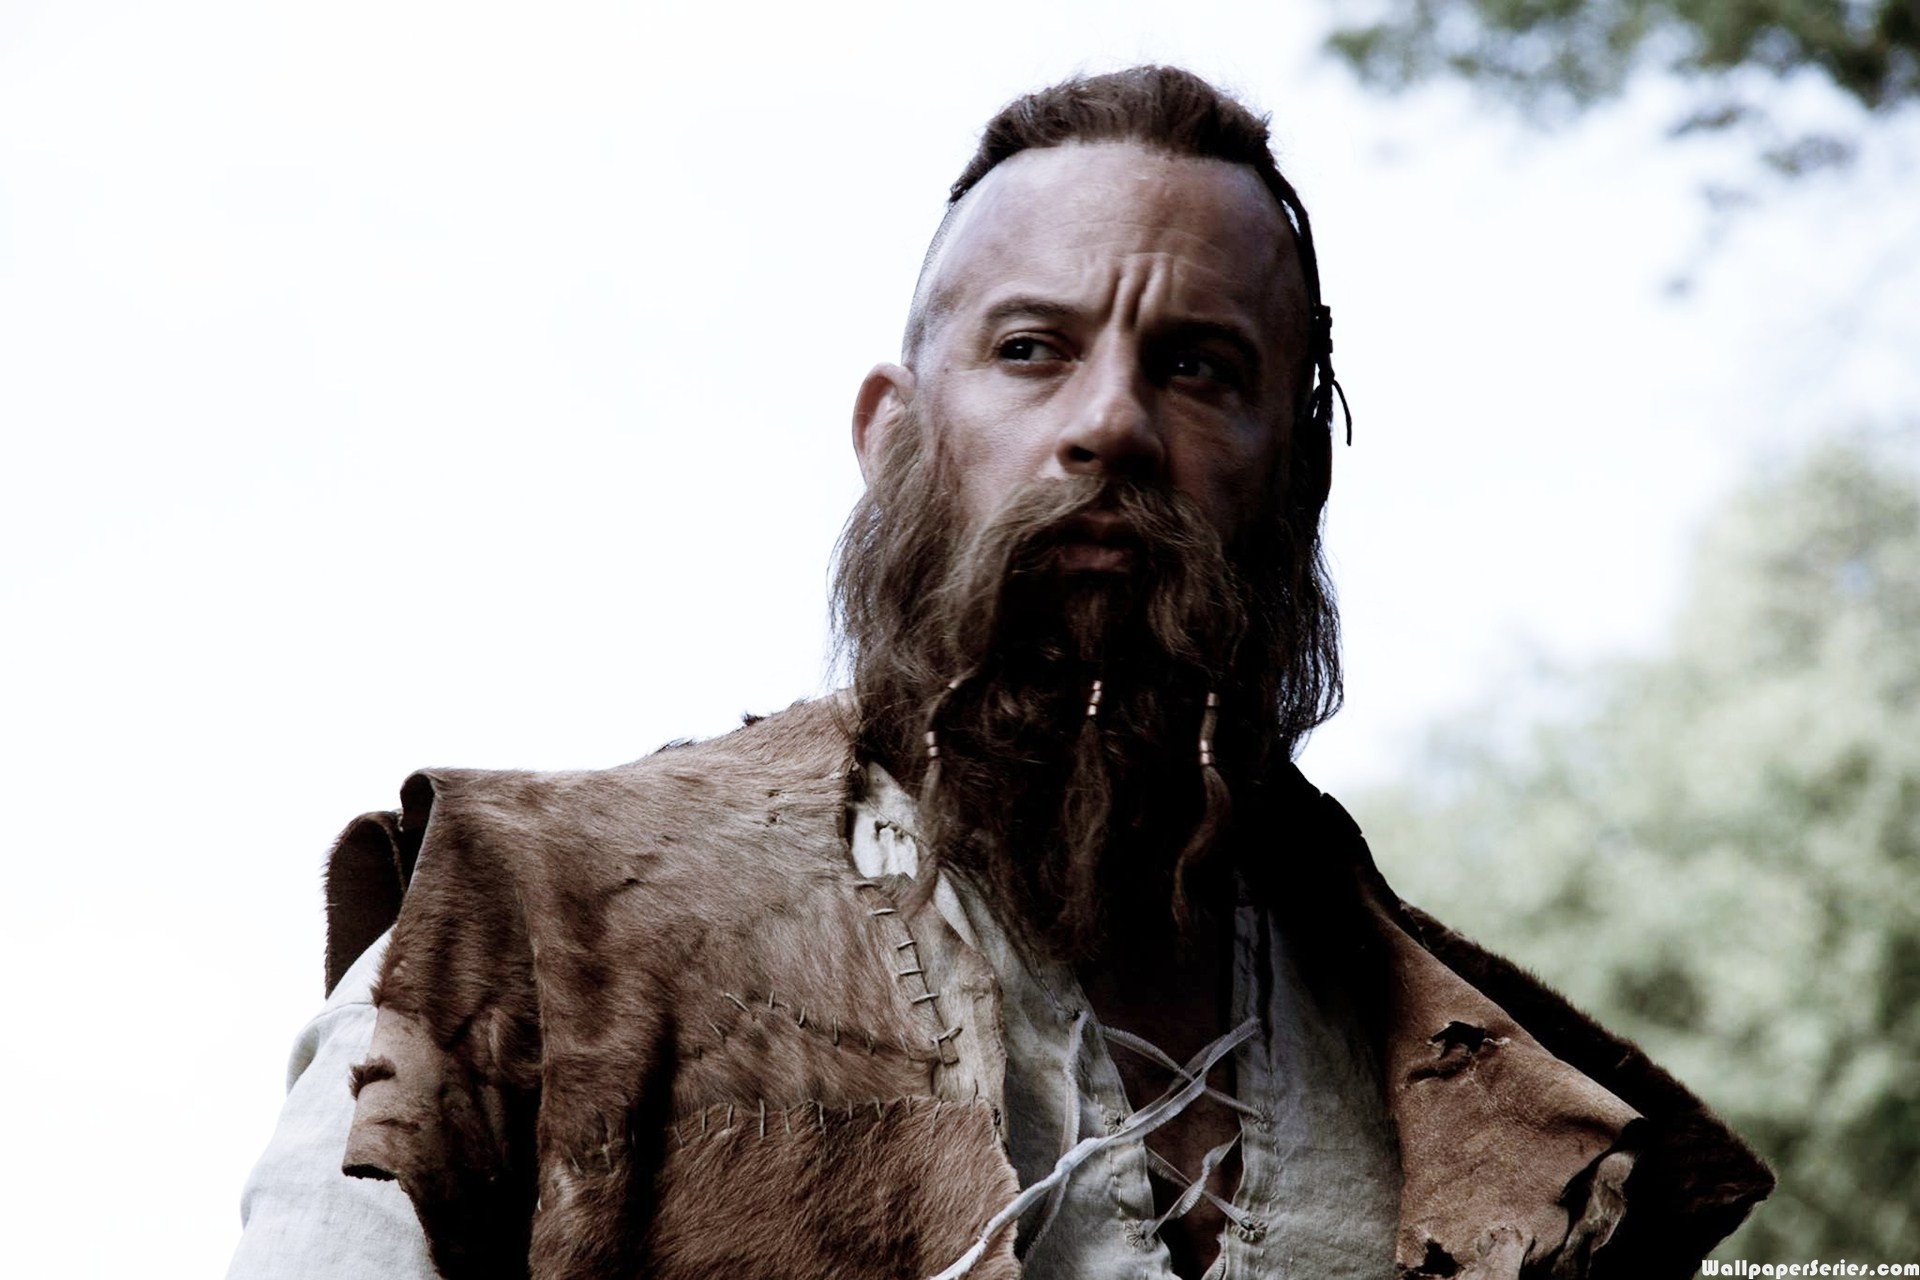 Last Witch Hunter: Did Vin Diesel do it right in the Last Witch Hunter? 